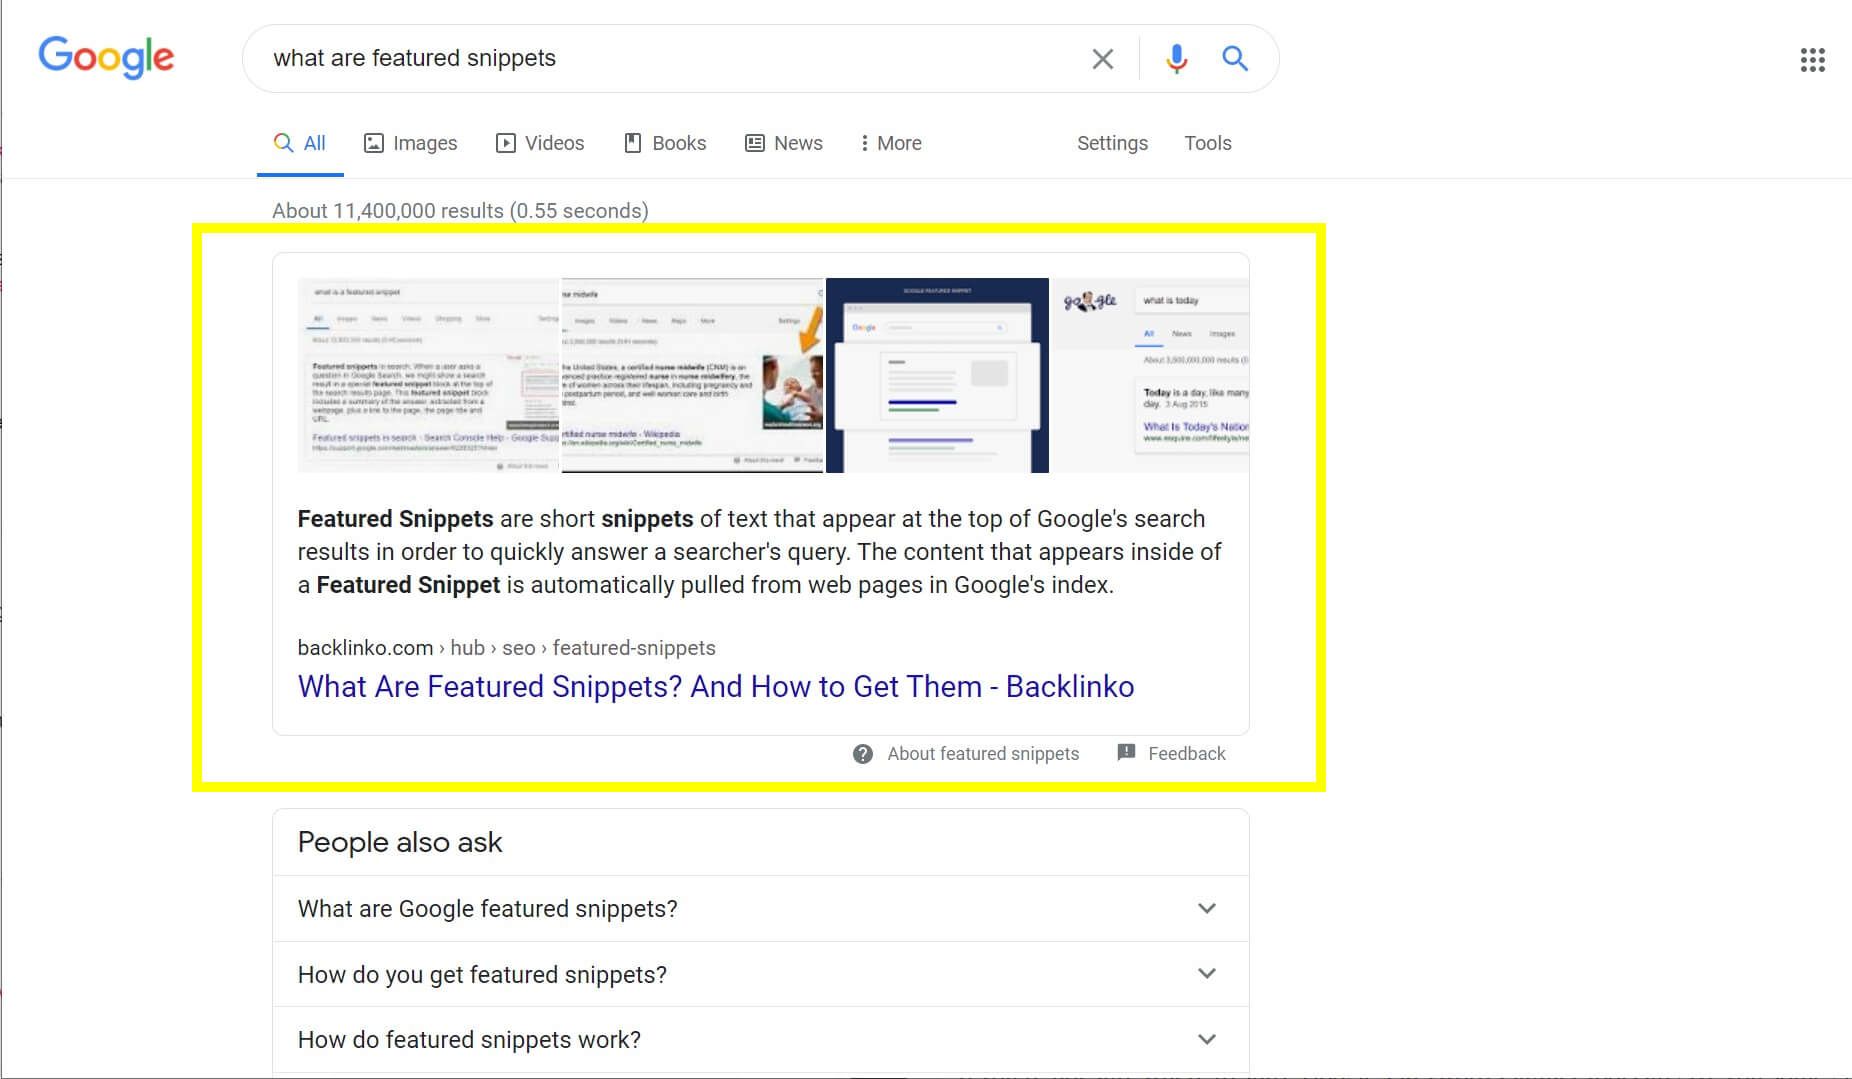 An example of a featured snippet on Google.